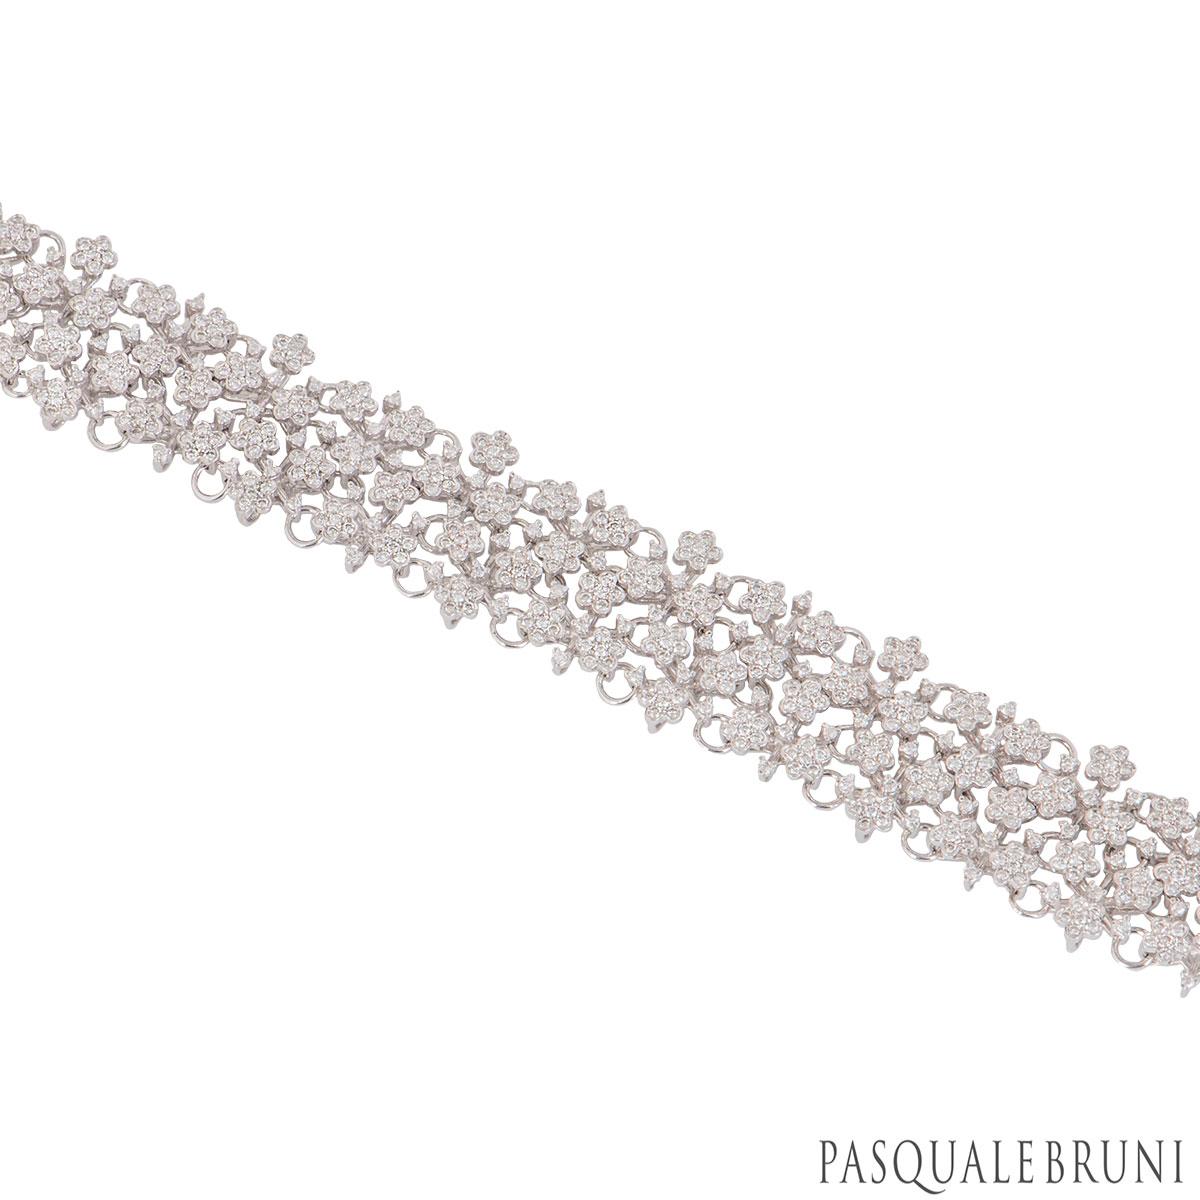 An 18k white gold suite by Pasquale Bruni from the Prata Fiorito collection. The suite consists of a pair of earrings, bracelet and necklace in an open work design set with flowers each individually set with 6 round brilliant cut diamonds. There are